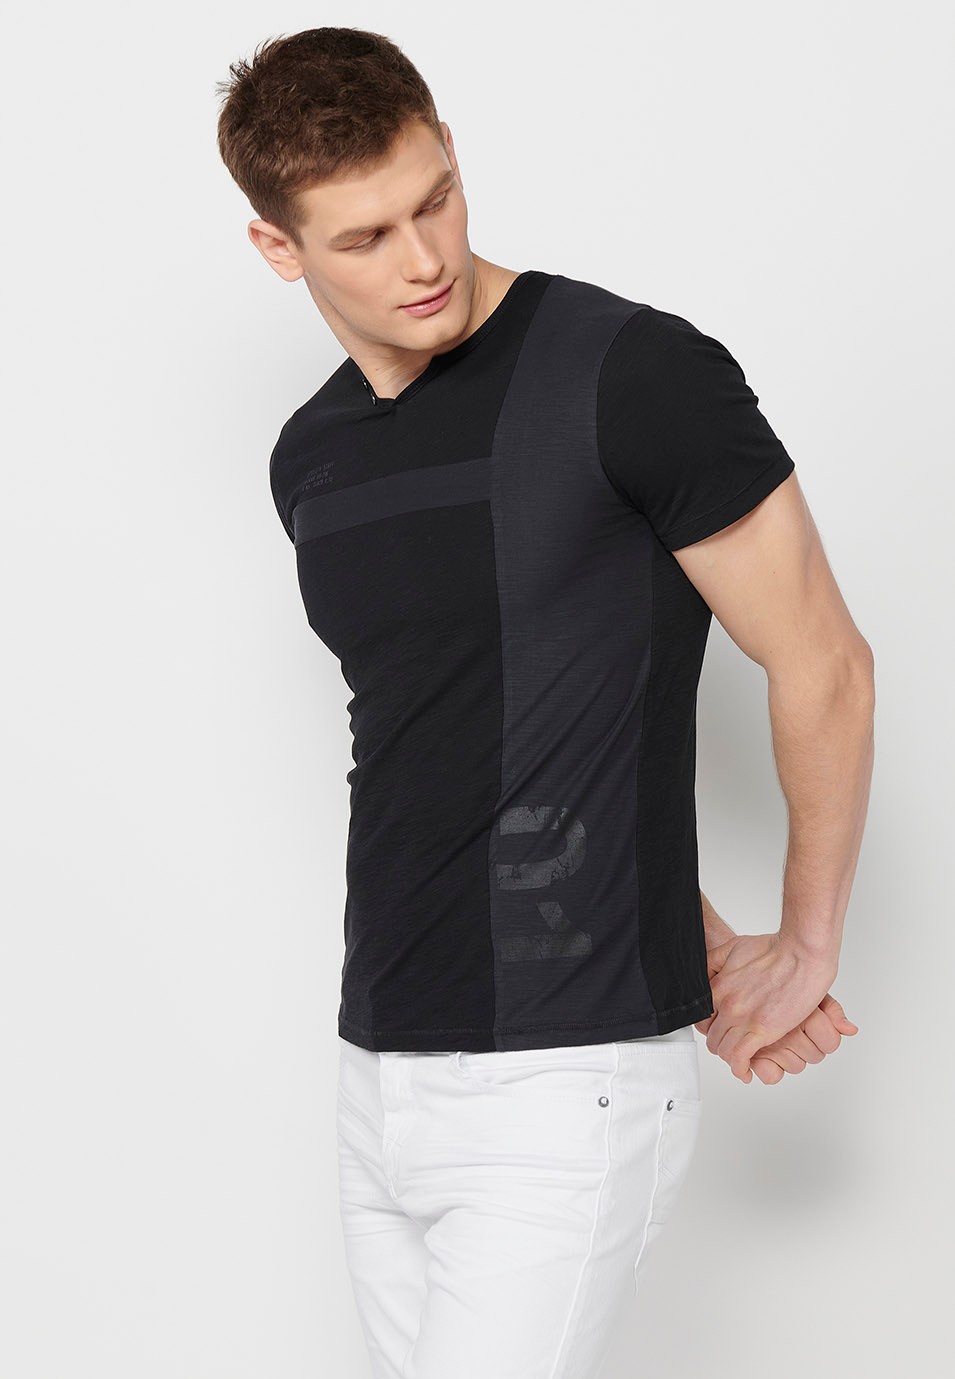  Men's black short-sleeved cotton t-shirt, round neck with button opening